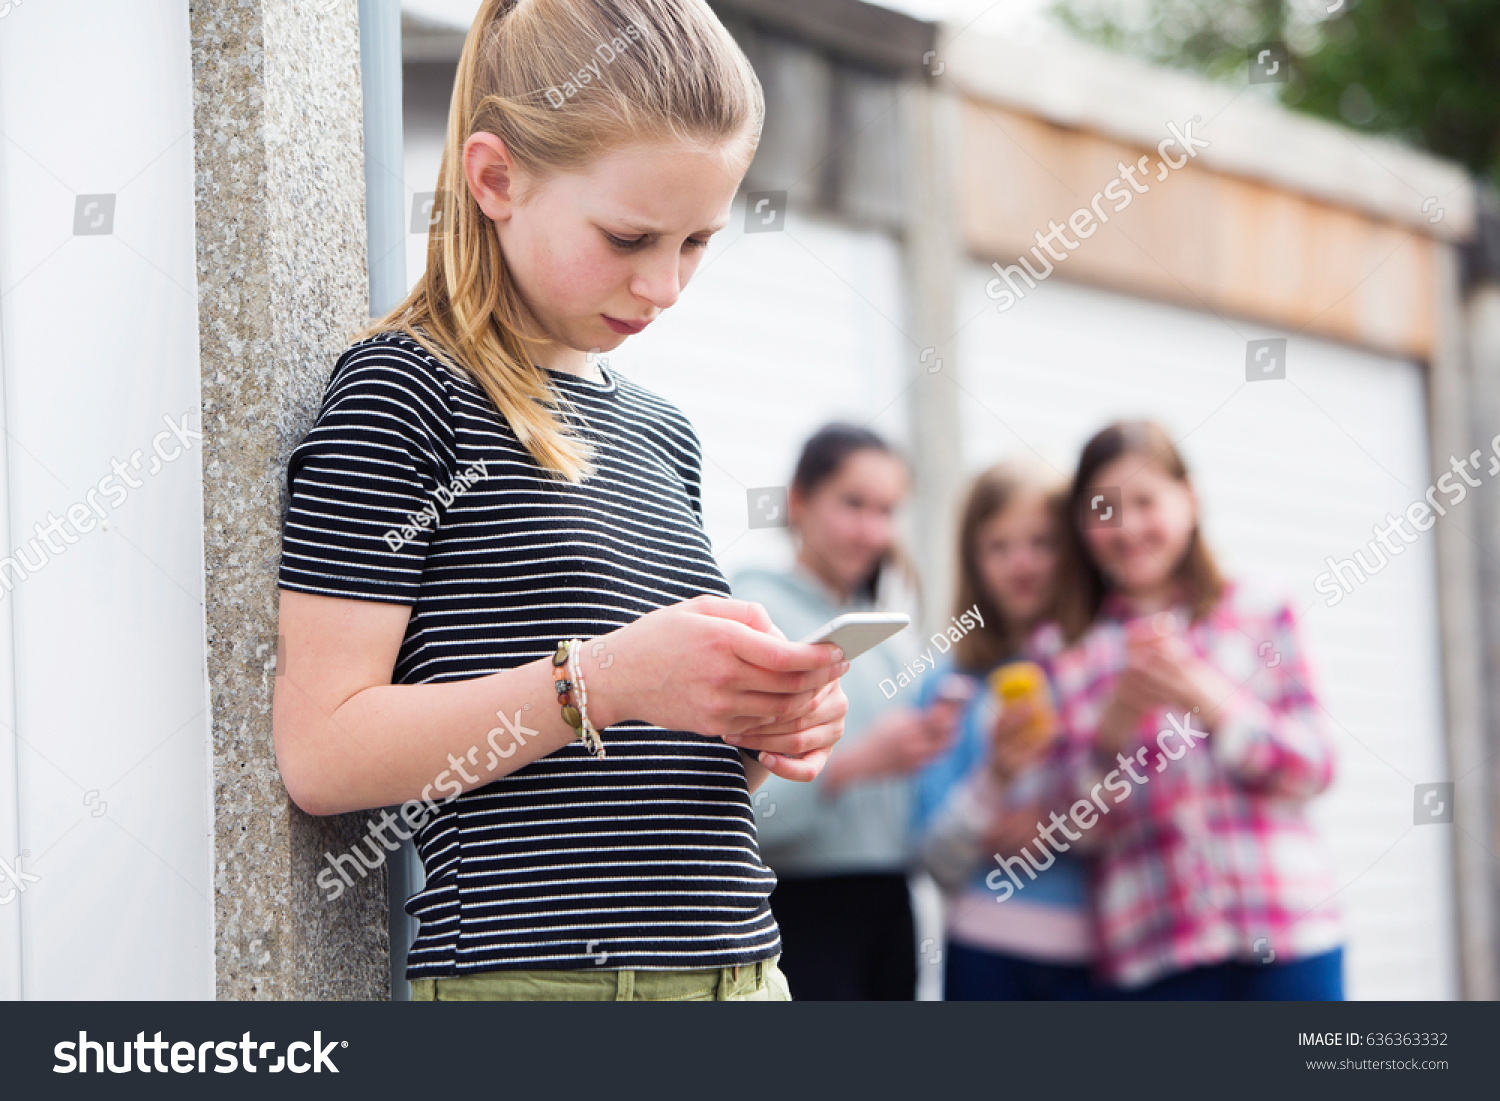 Pre Teen Girl Being Bullied By Text Message #636363332